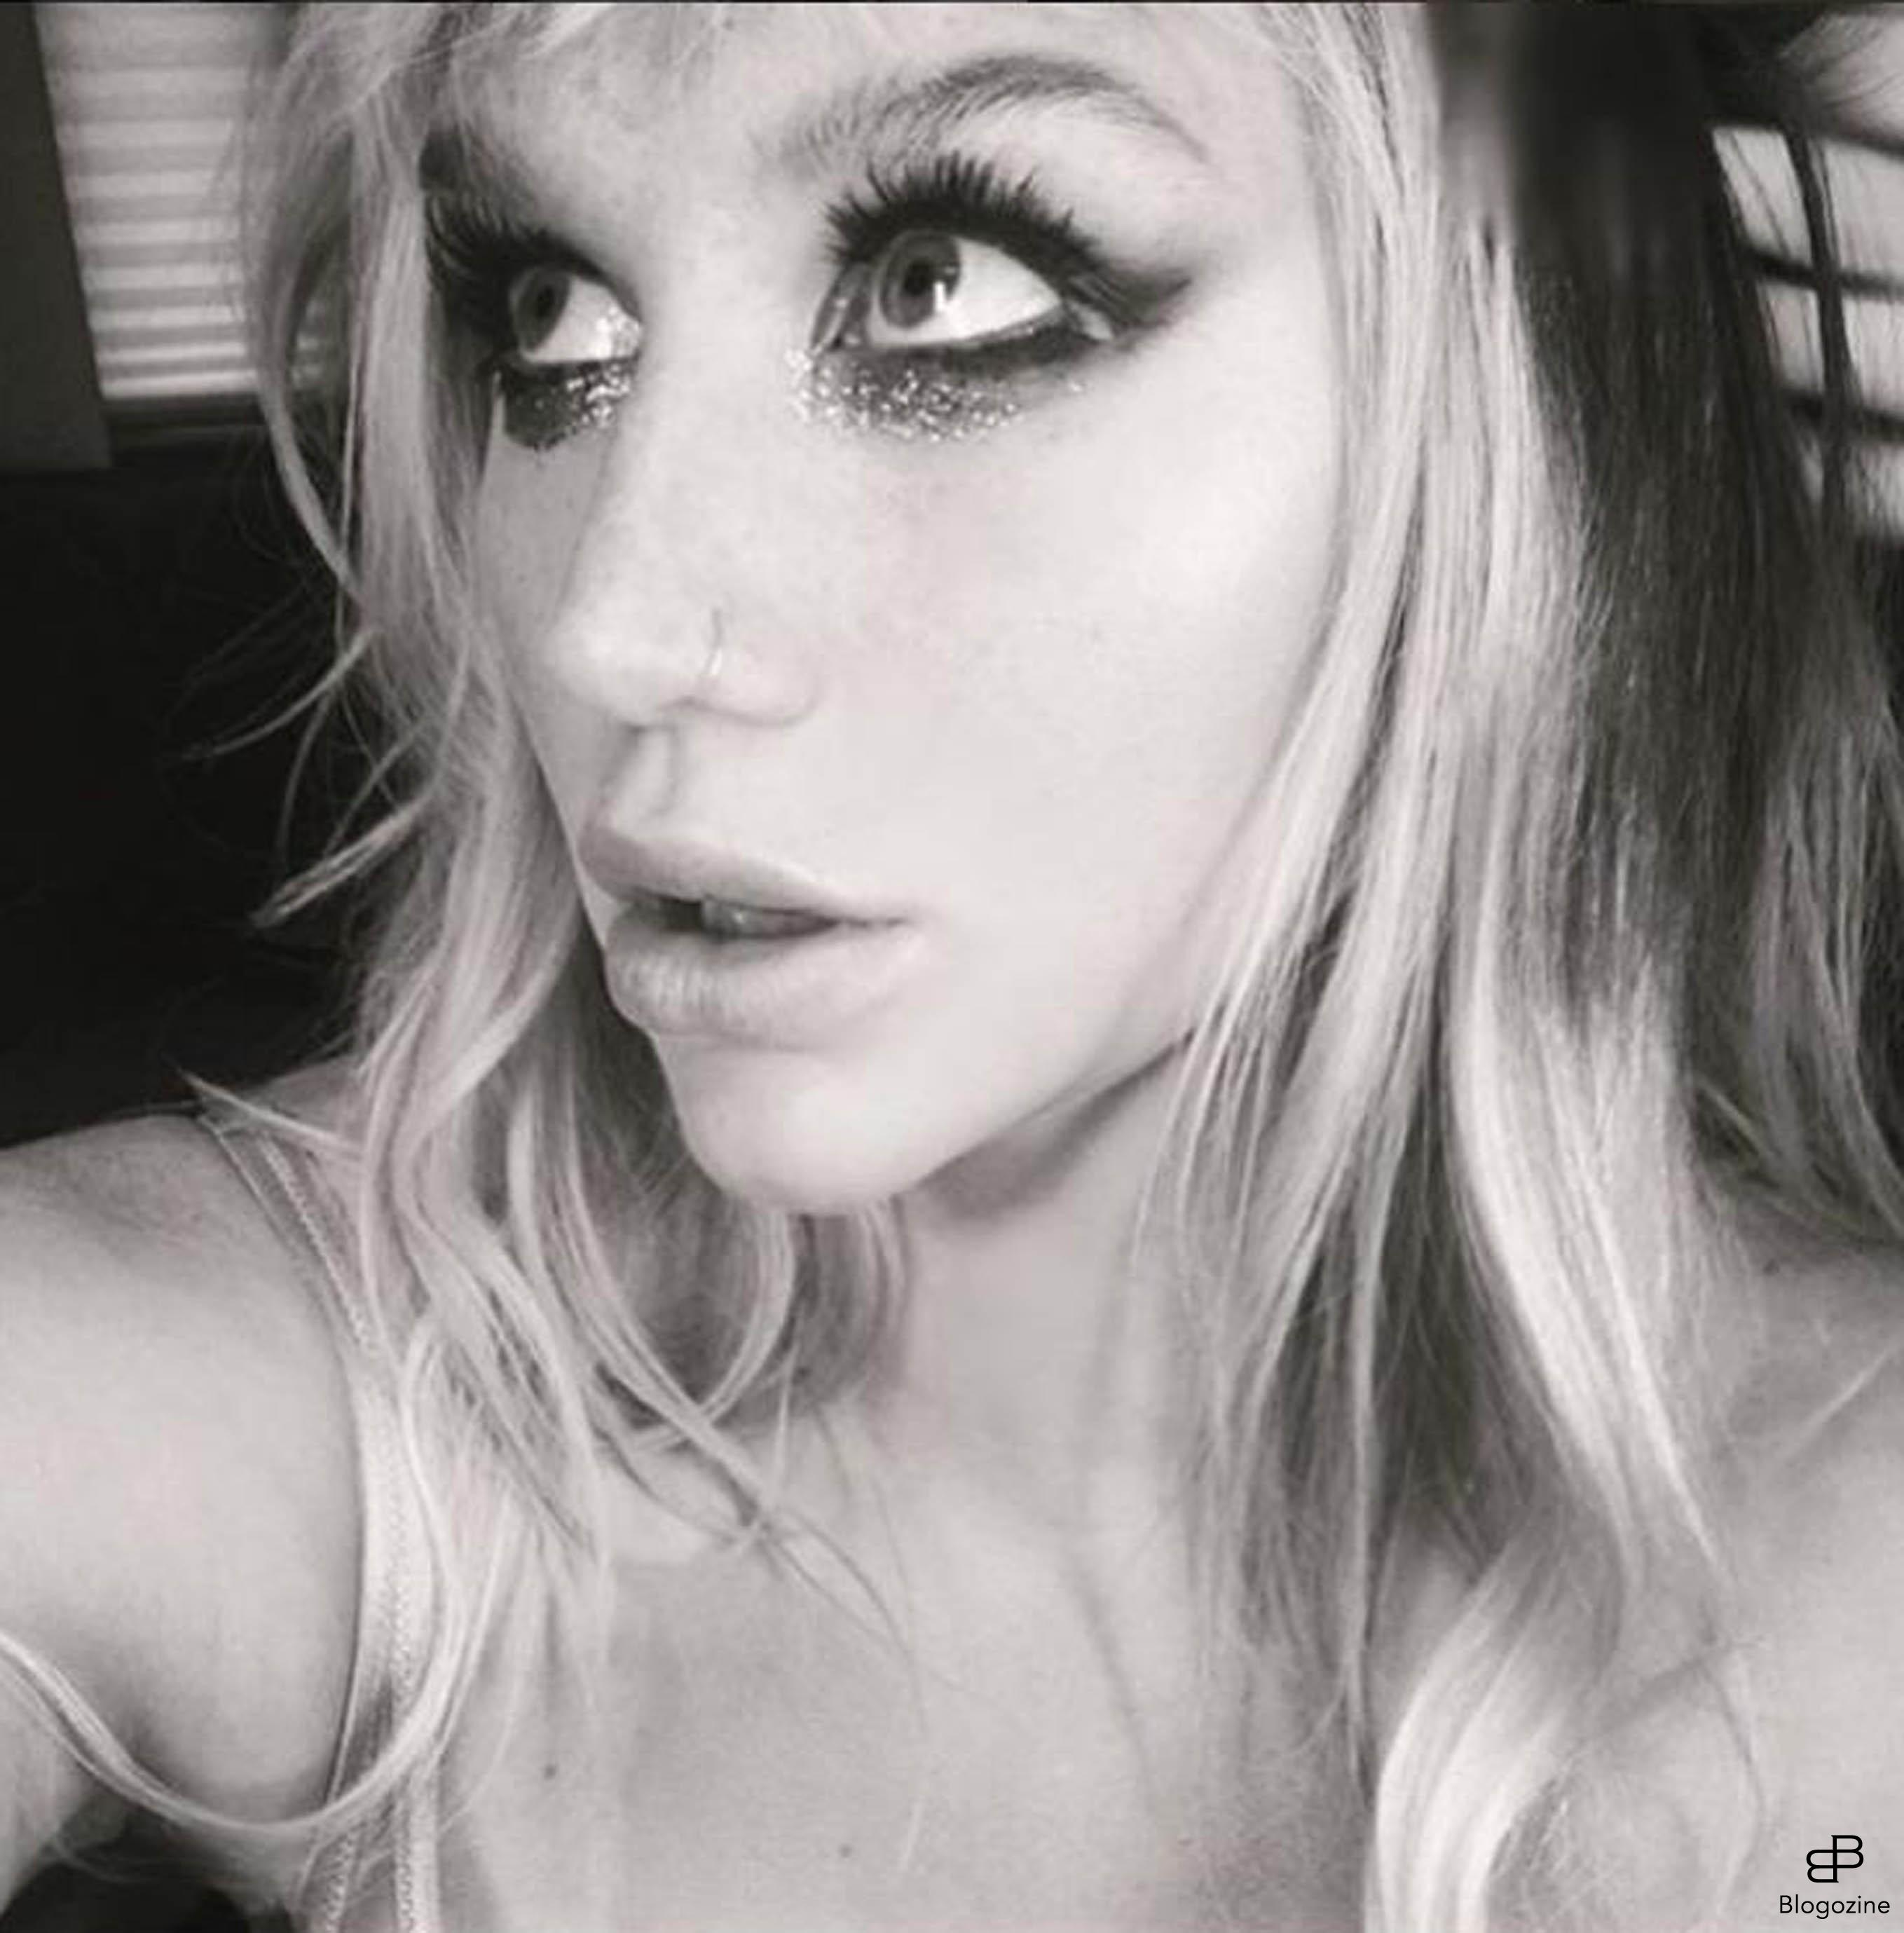 6268784 29-9-2016 Celebrity Selfies Pictured: Kesha PLANET PHOTOS www.planetphotos.co.uk info@planetphotos.co.uk +44 (0)20 8883 1438 DISTR. STELLA PICTURES